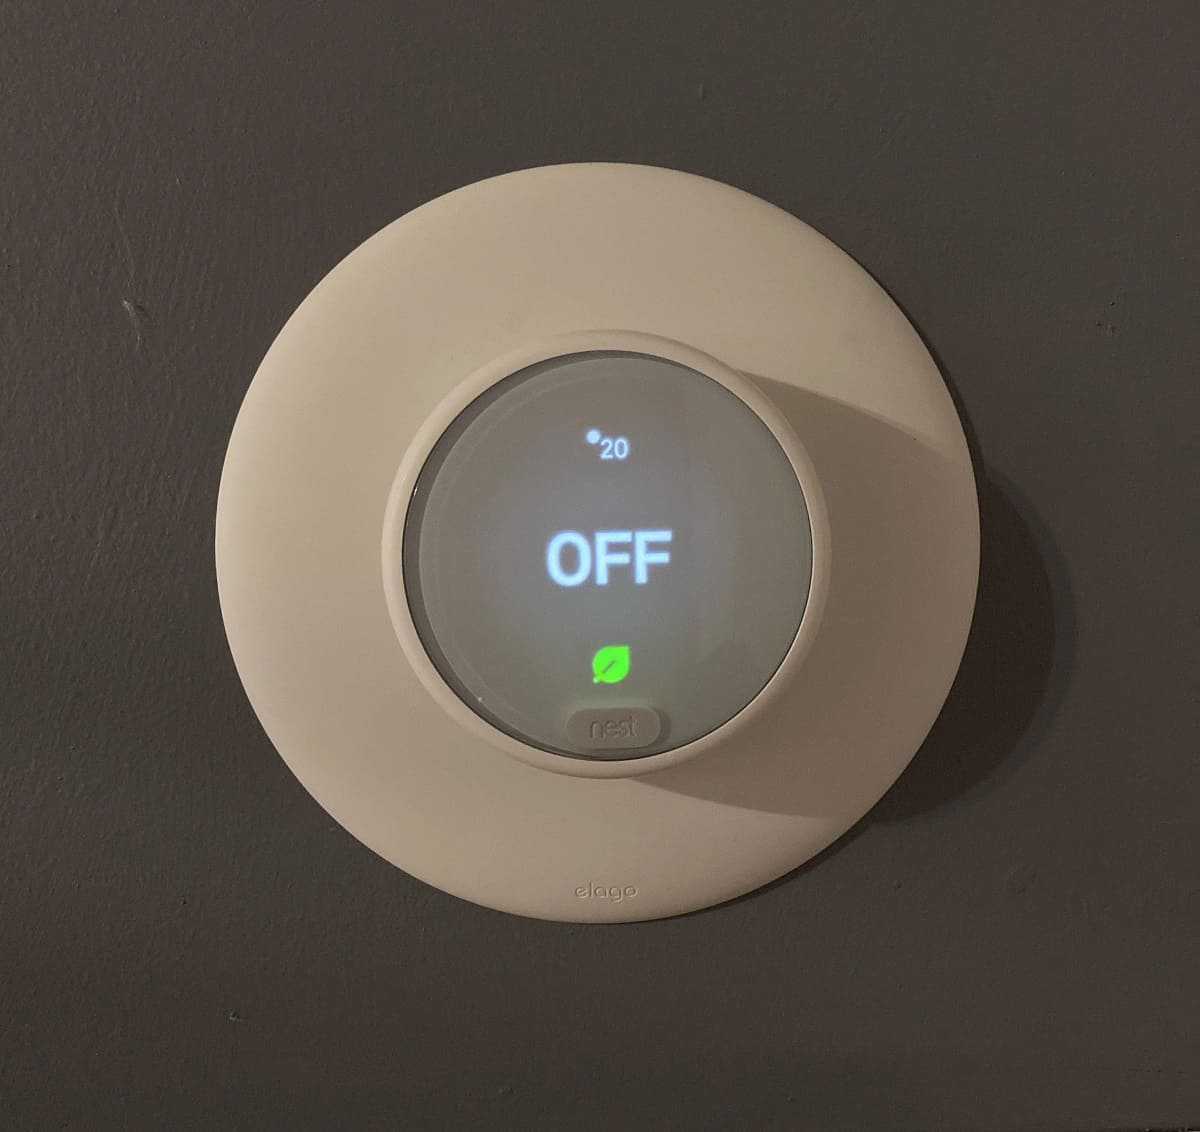 Why Does My Thermostat Turn Off